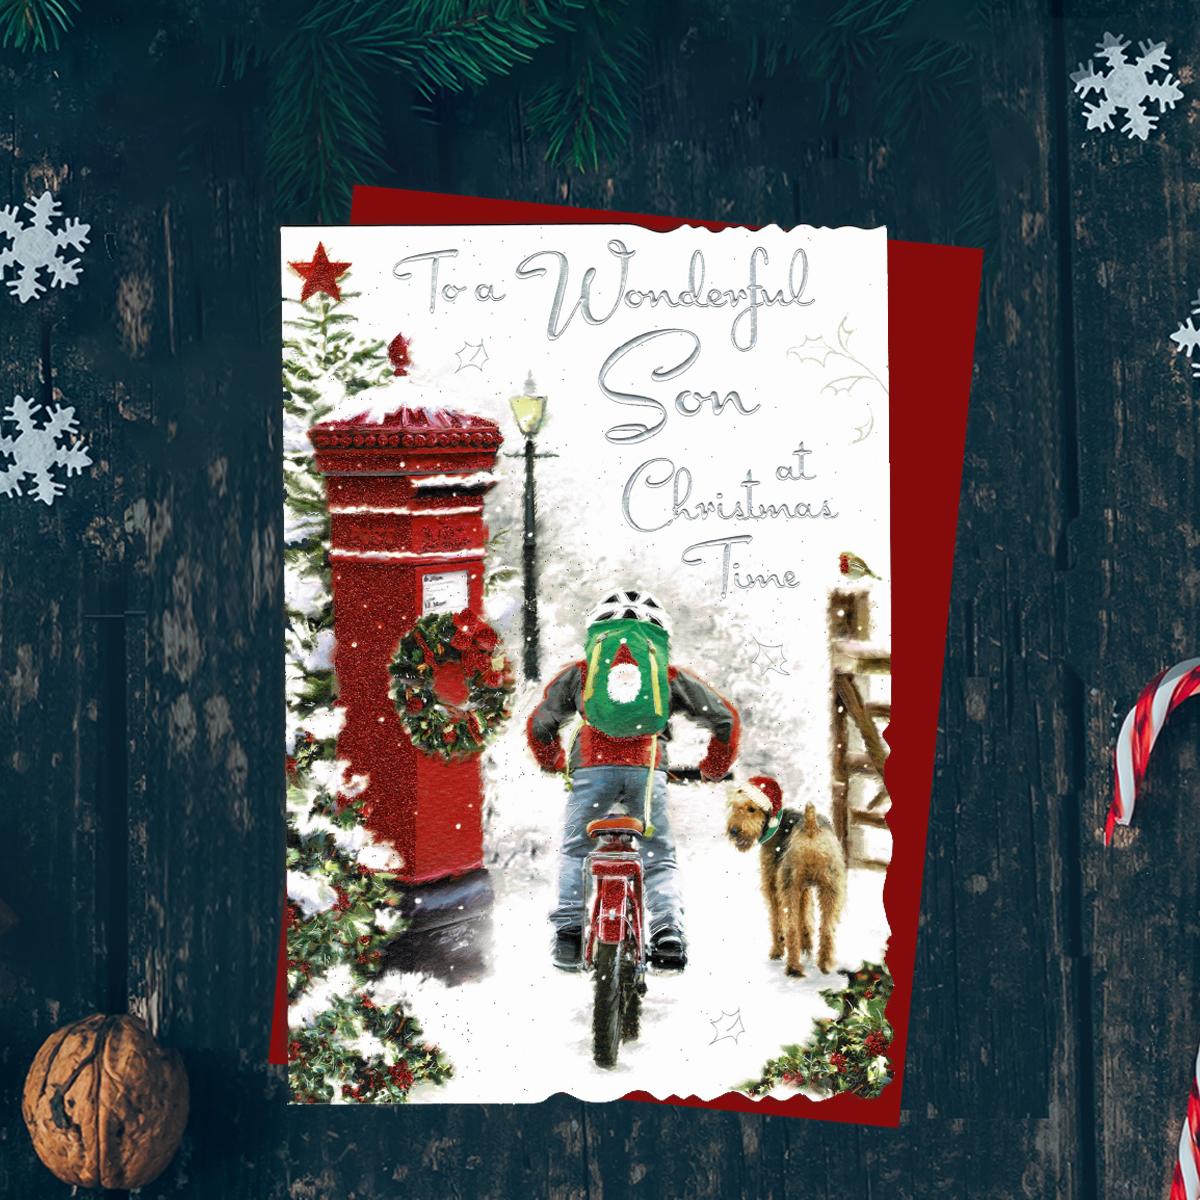 To A Wonderful Son At Christmas Time Featuring A Boy Riding A Bicycle Past A Decorated Post Box In The Snow. A  Dog Looks On. Finished With silver Foil lettering, Red Glitter and Red Envelope